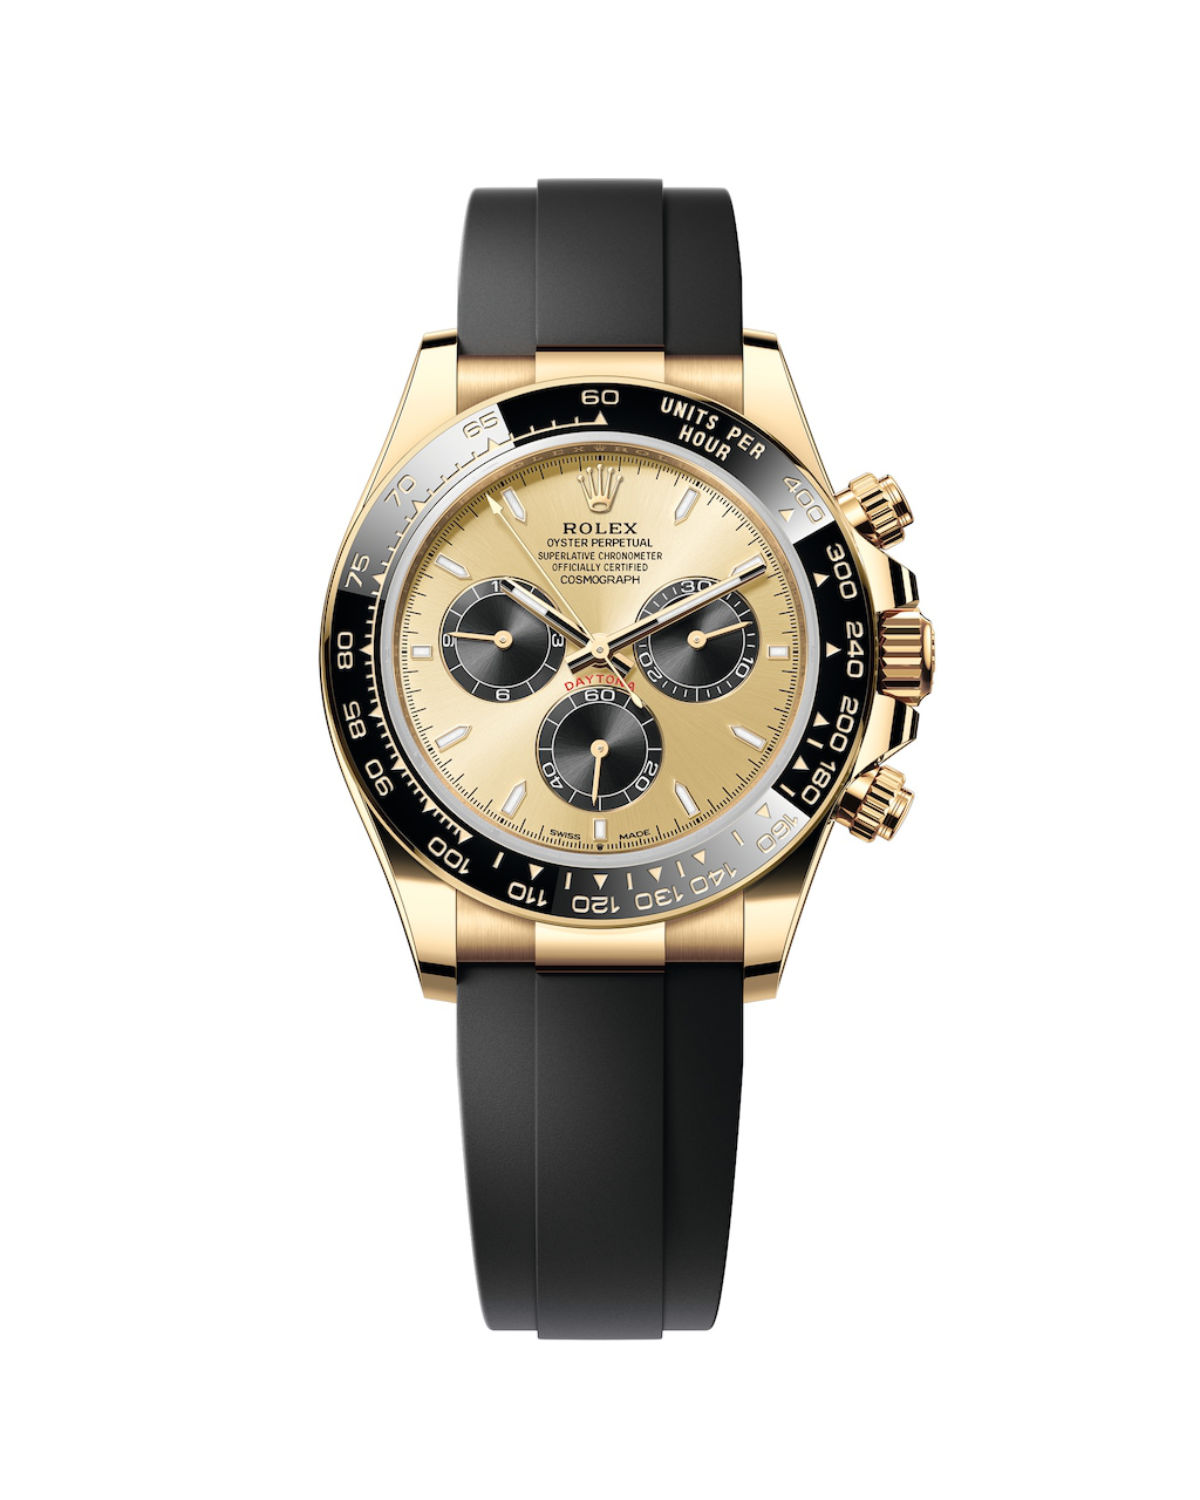 Rolex Presents Its New-Generation Oyster Perpetual Cosmograph Daytona Watch